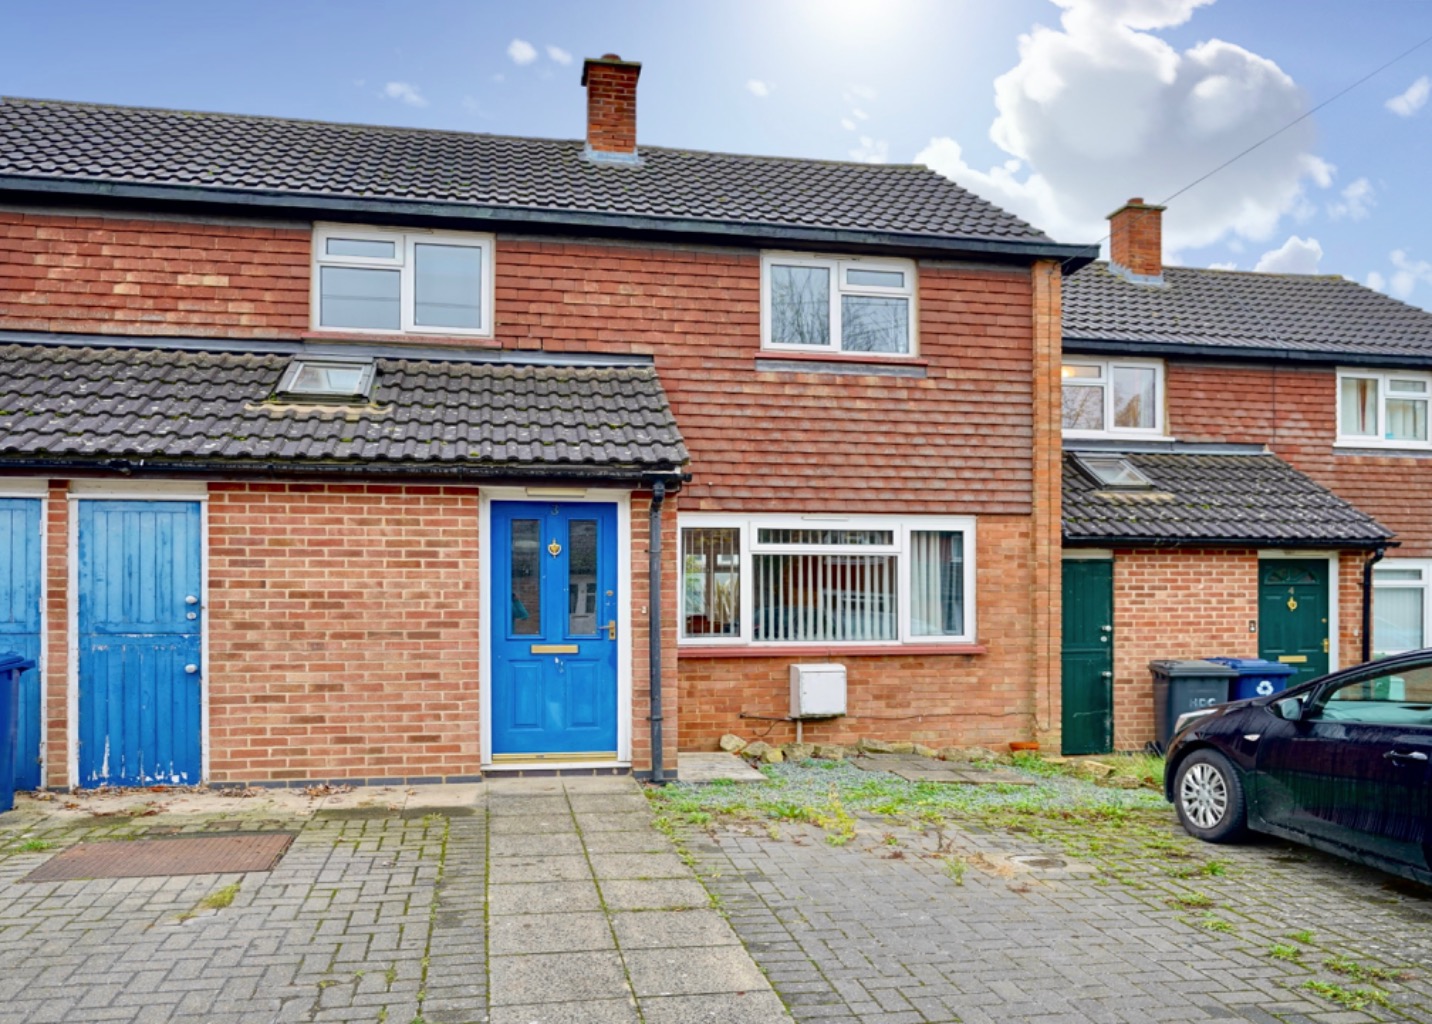 3 bed terraced house for sale in Dorset Close, Huntingdon - Property Image 1